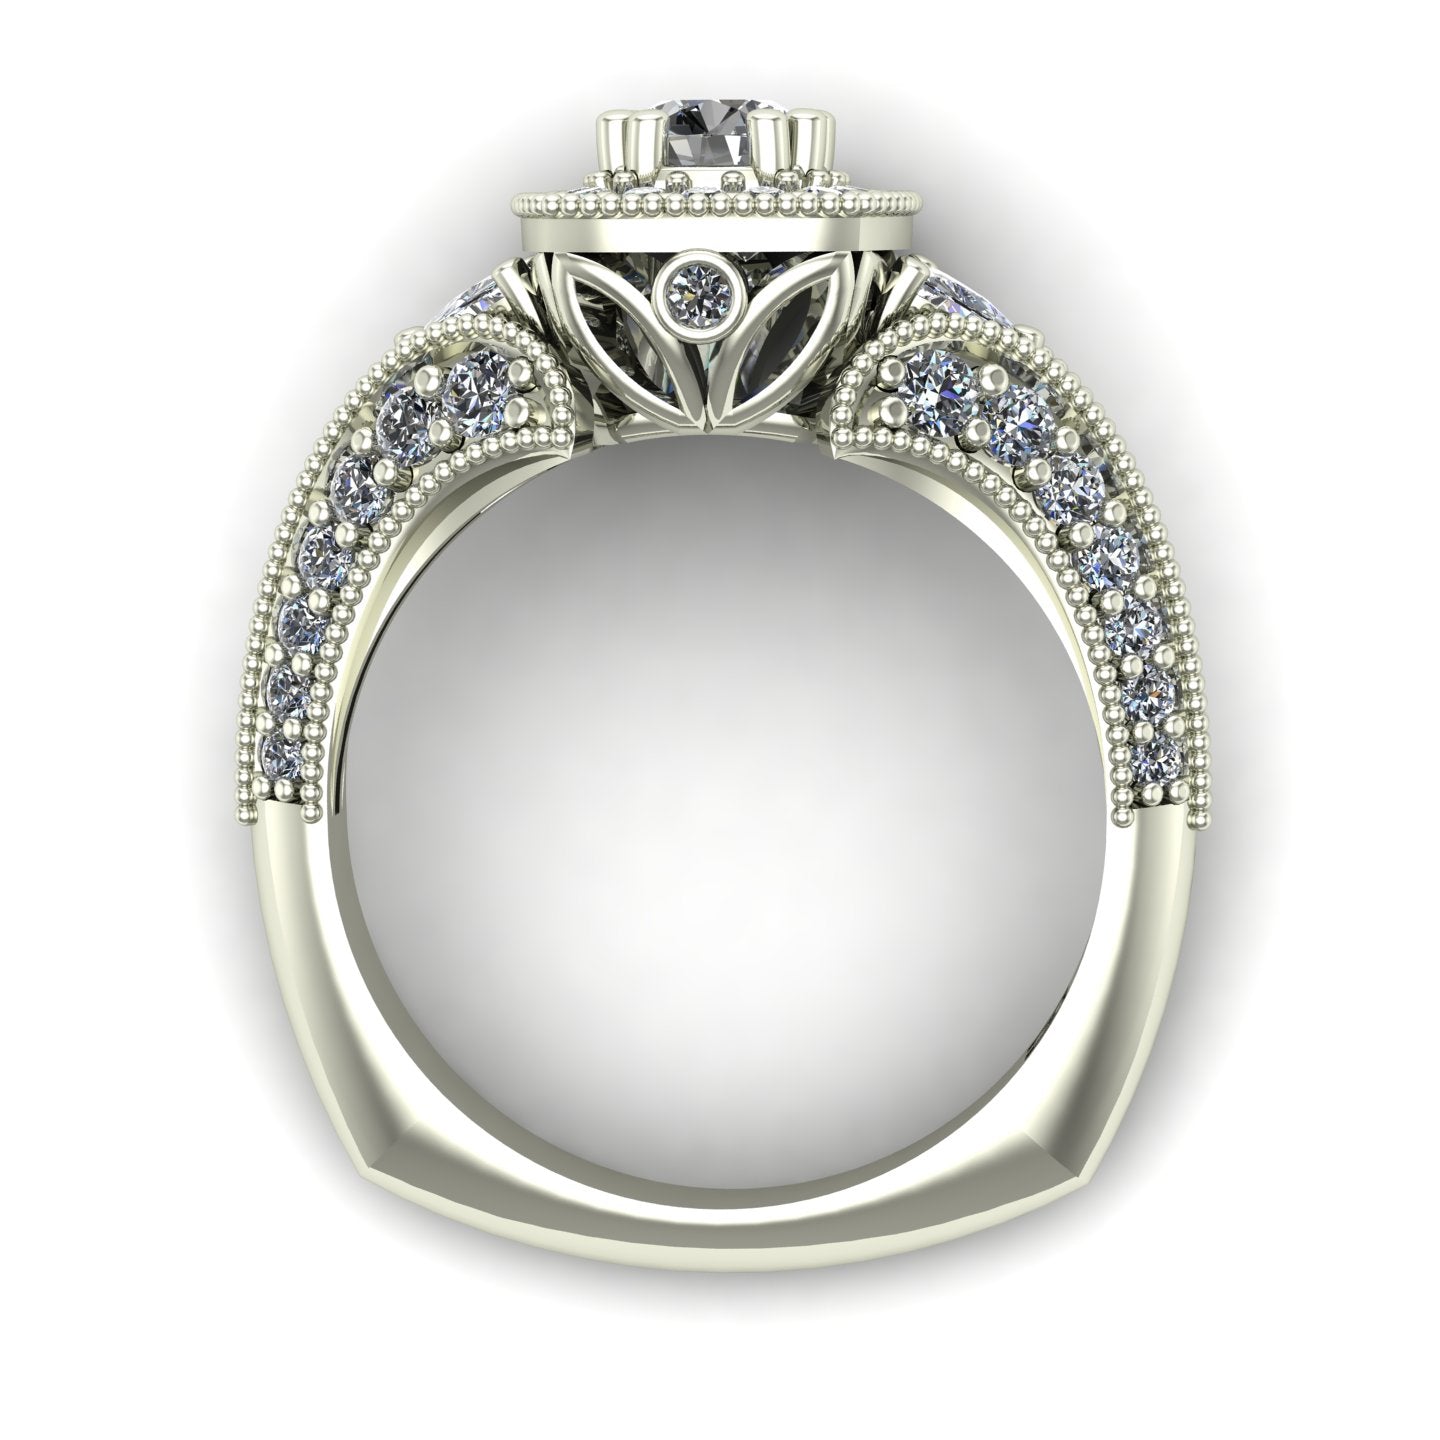 diamond halo engagement ring with trillions and split shank in 14k white gold - Charles Babb Designs - through finger view